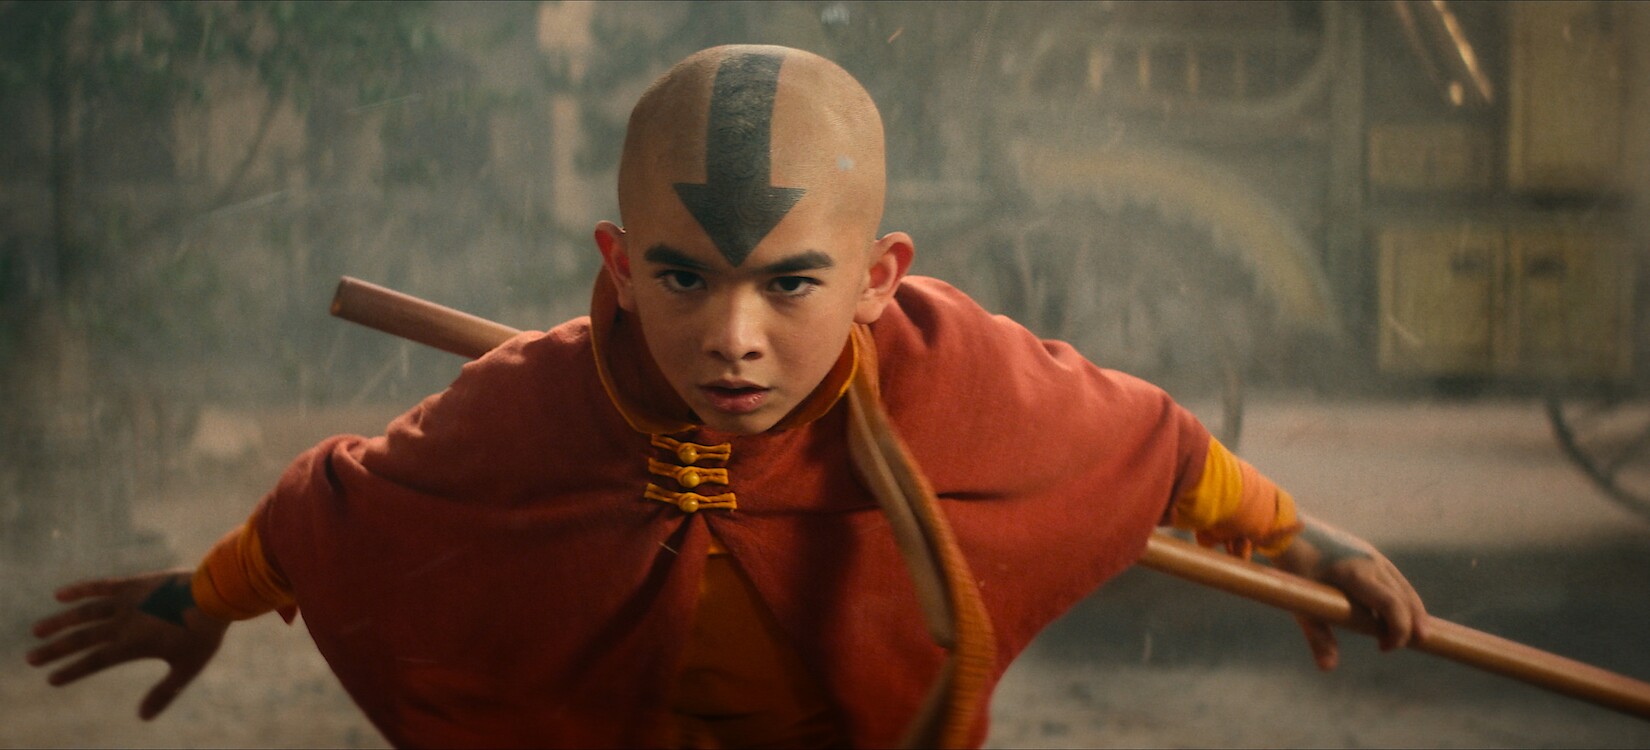 Geeked Week 2023: Get All the Surprise Announcements From 'Avatar: The Last  Airbender,' 'Scott Pilgrim Takes Off' and More - About Netflix